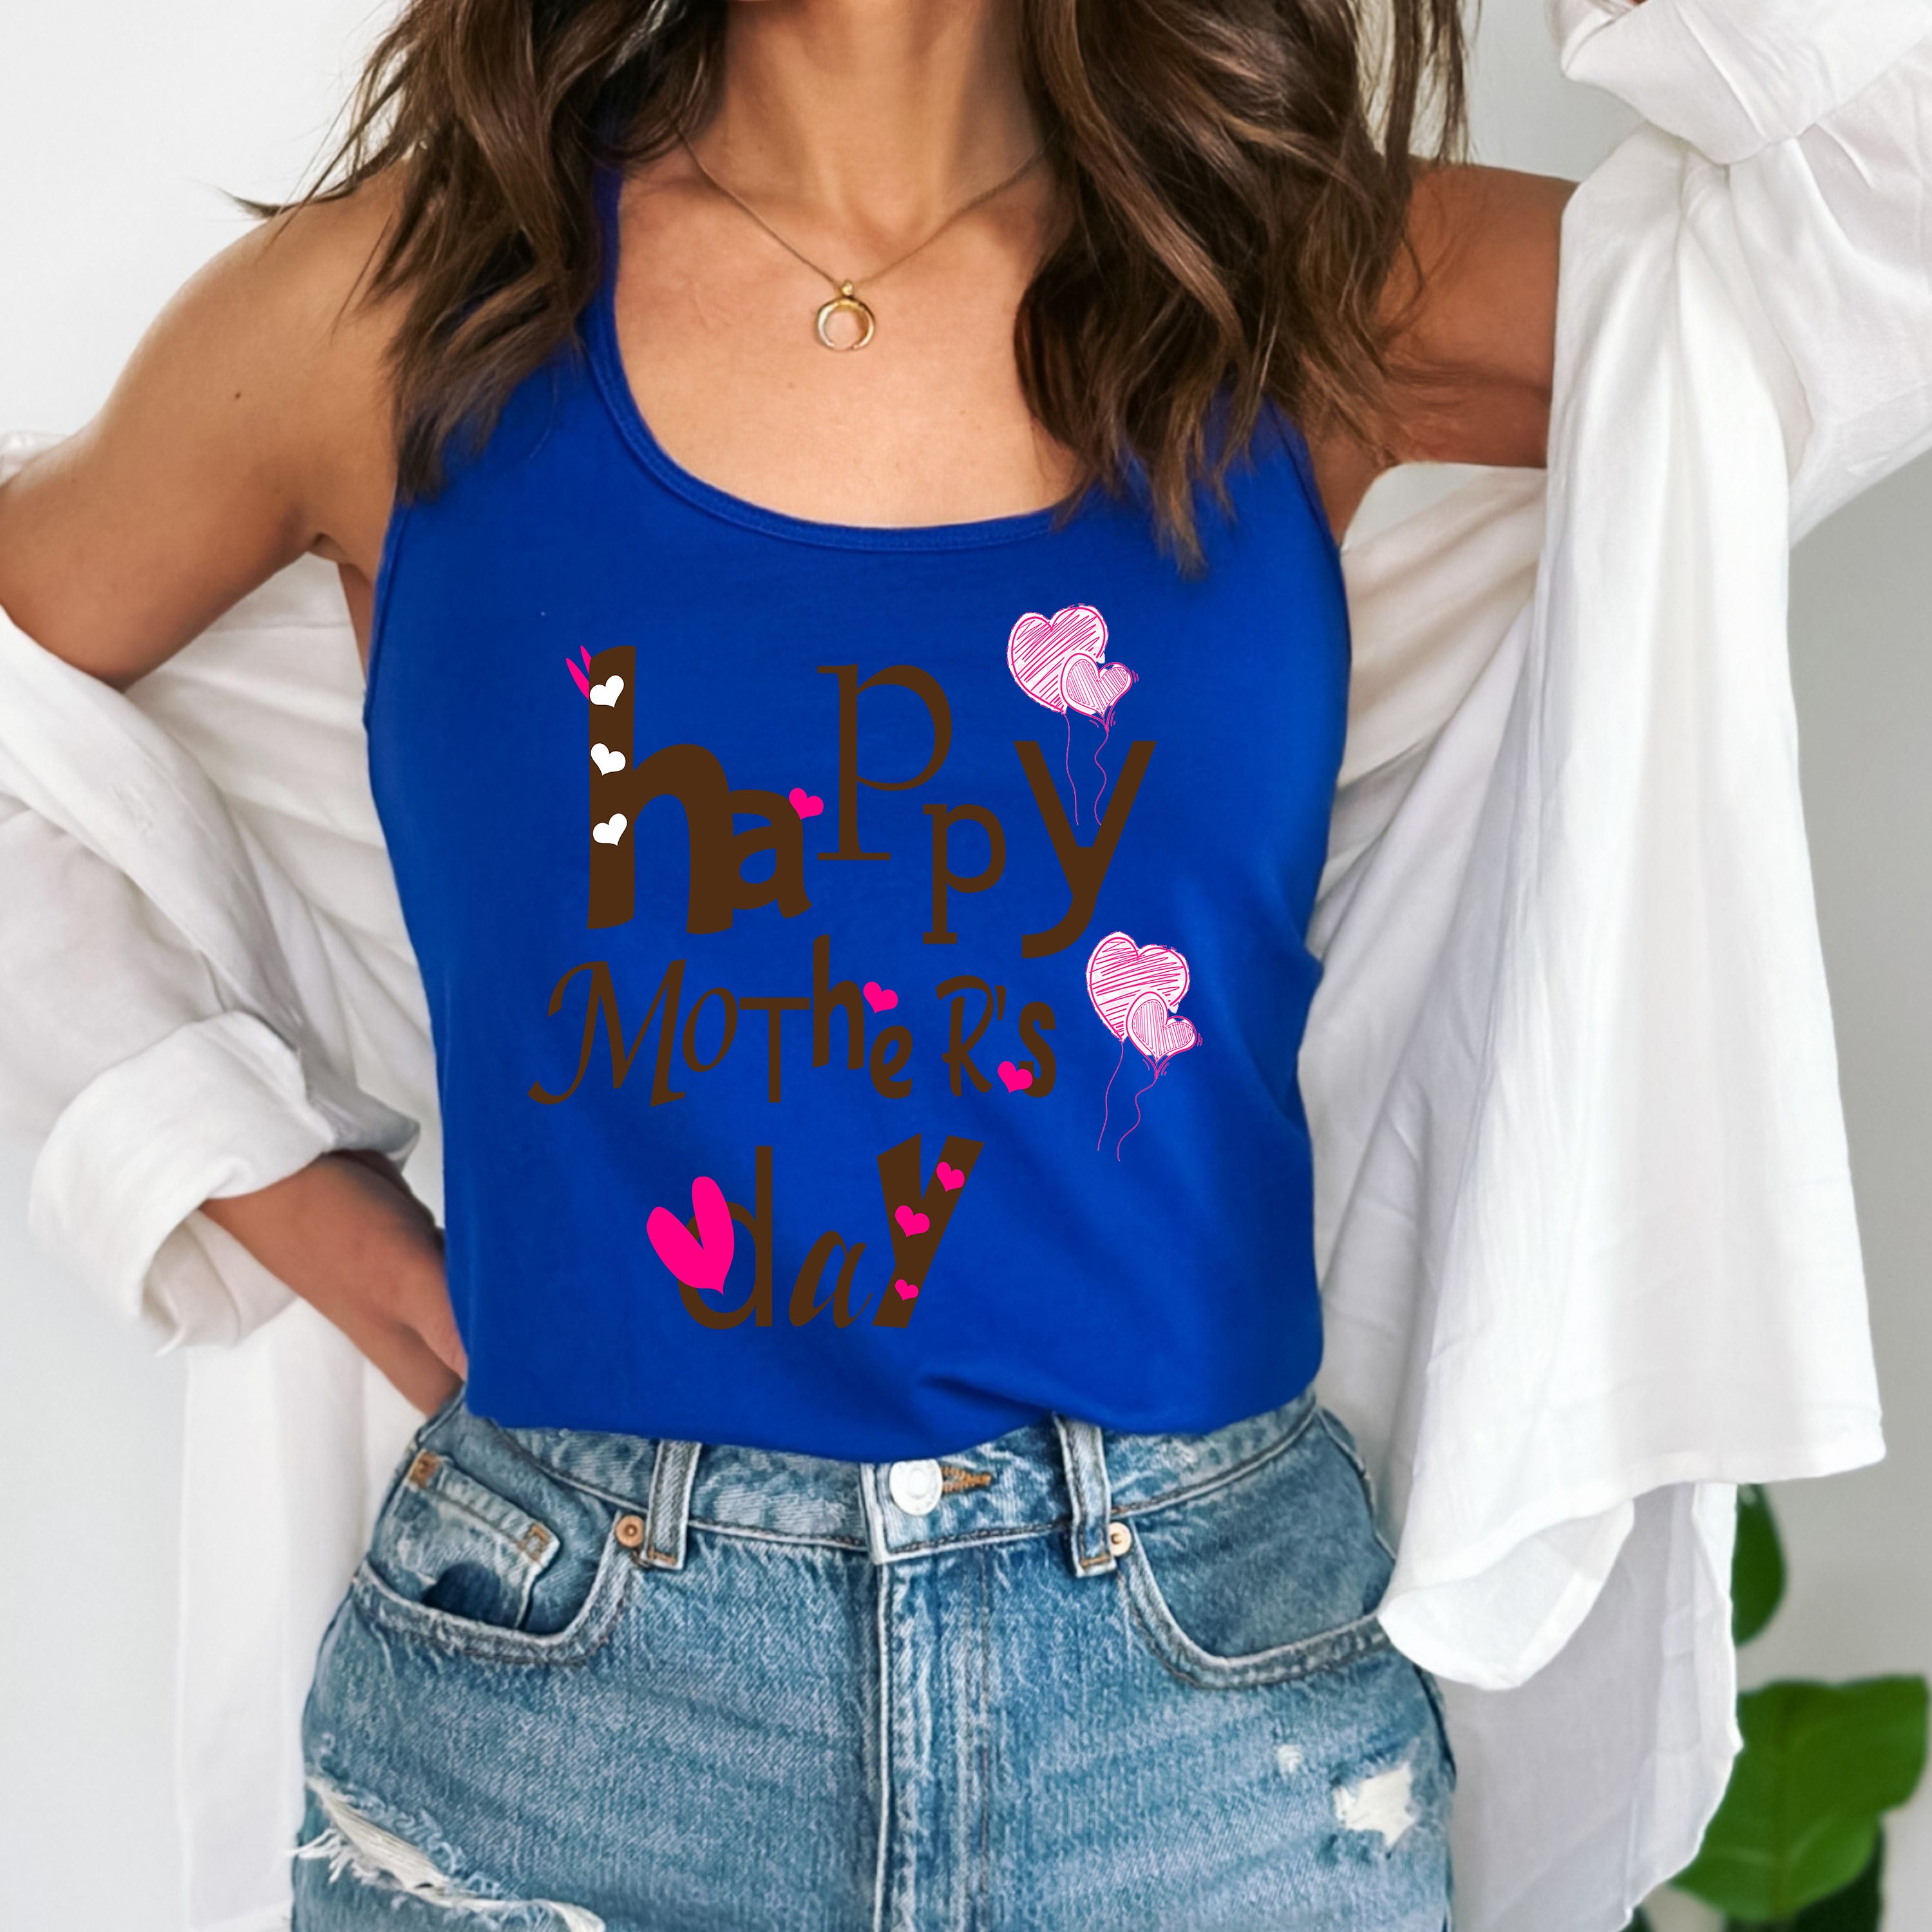 "HAPPY DAY" TANK TOP